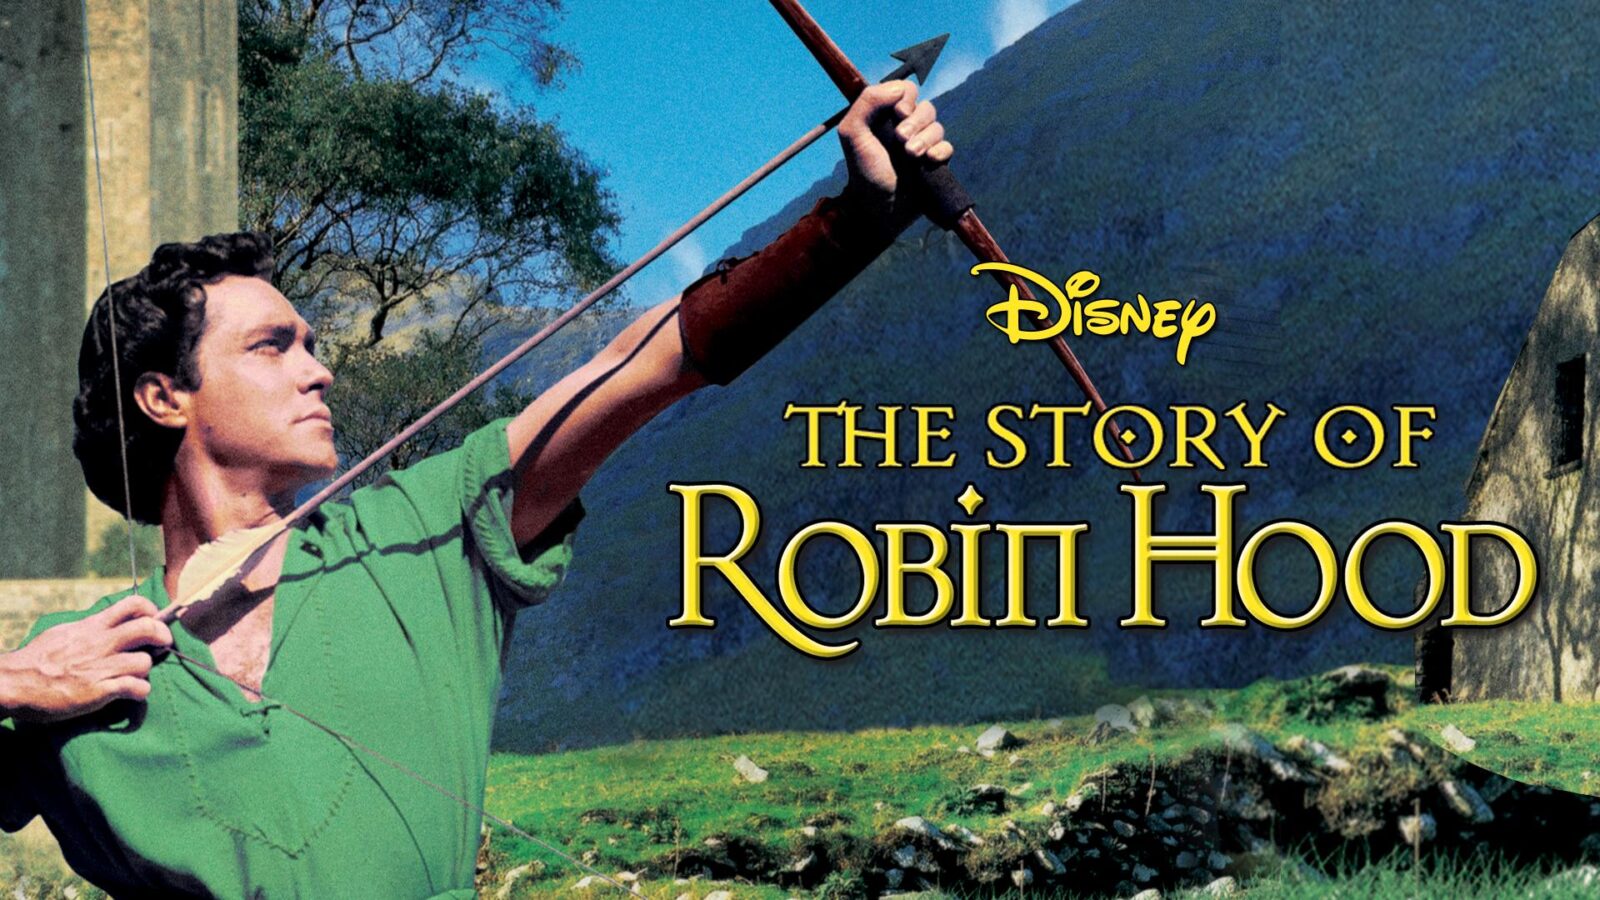 Image from "The Story of Robin Hood". Courtesy of Disney